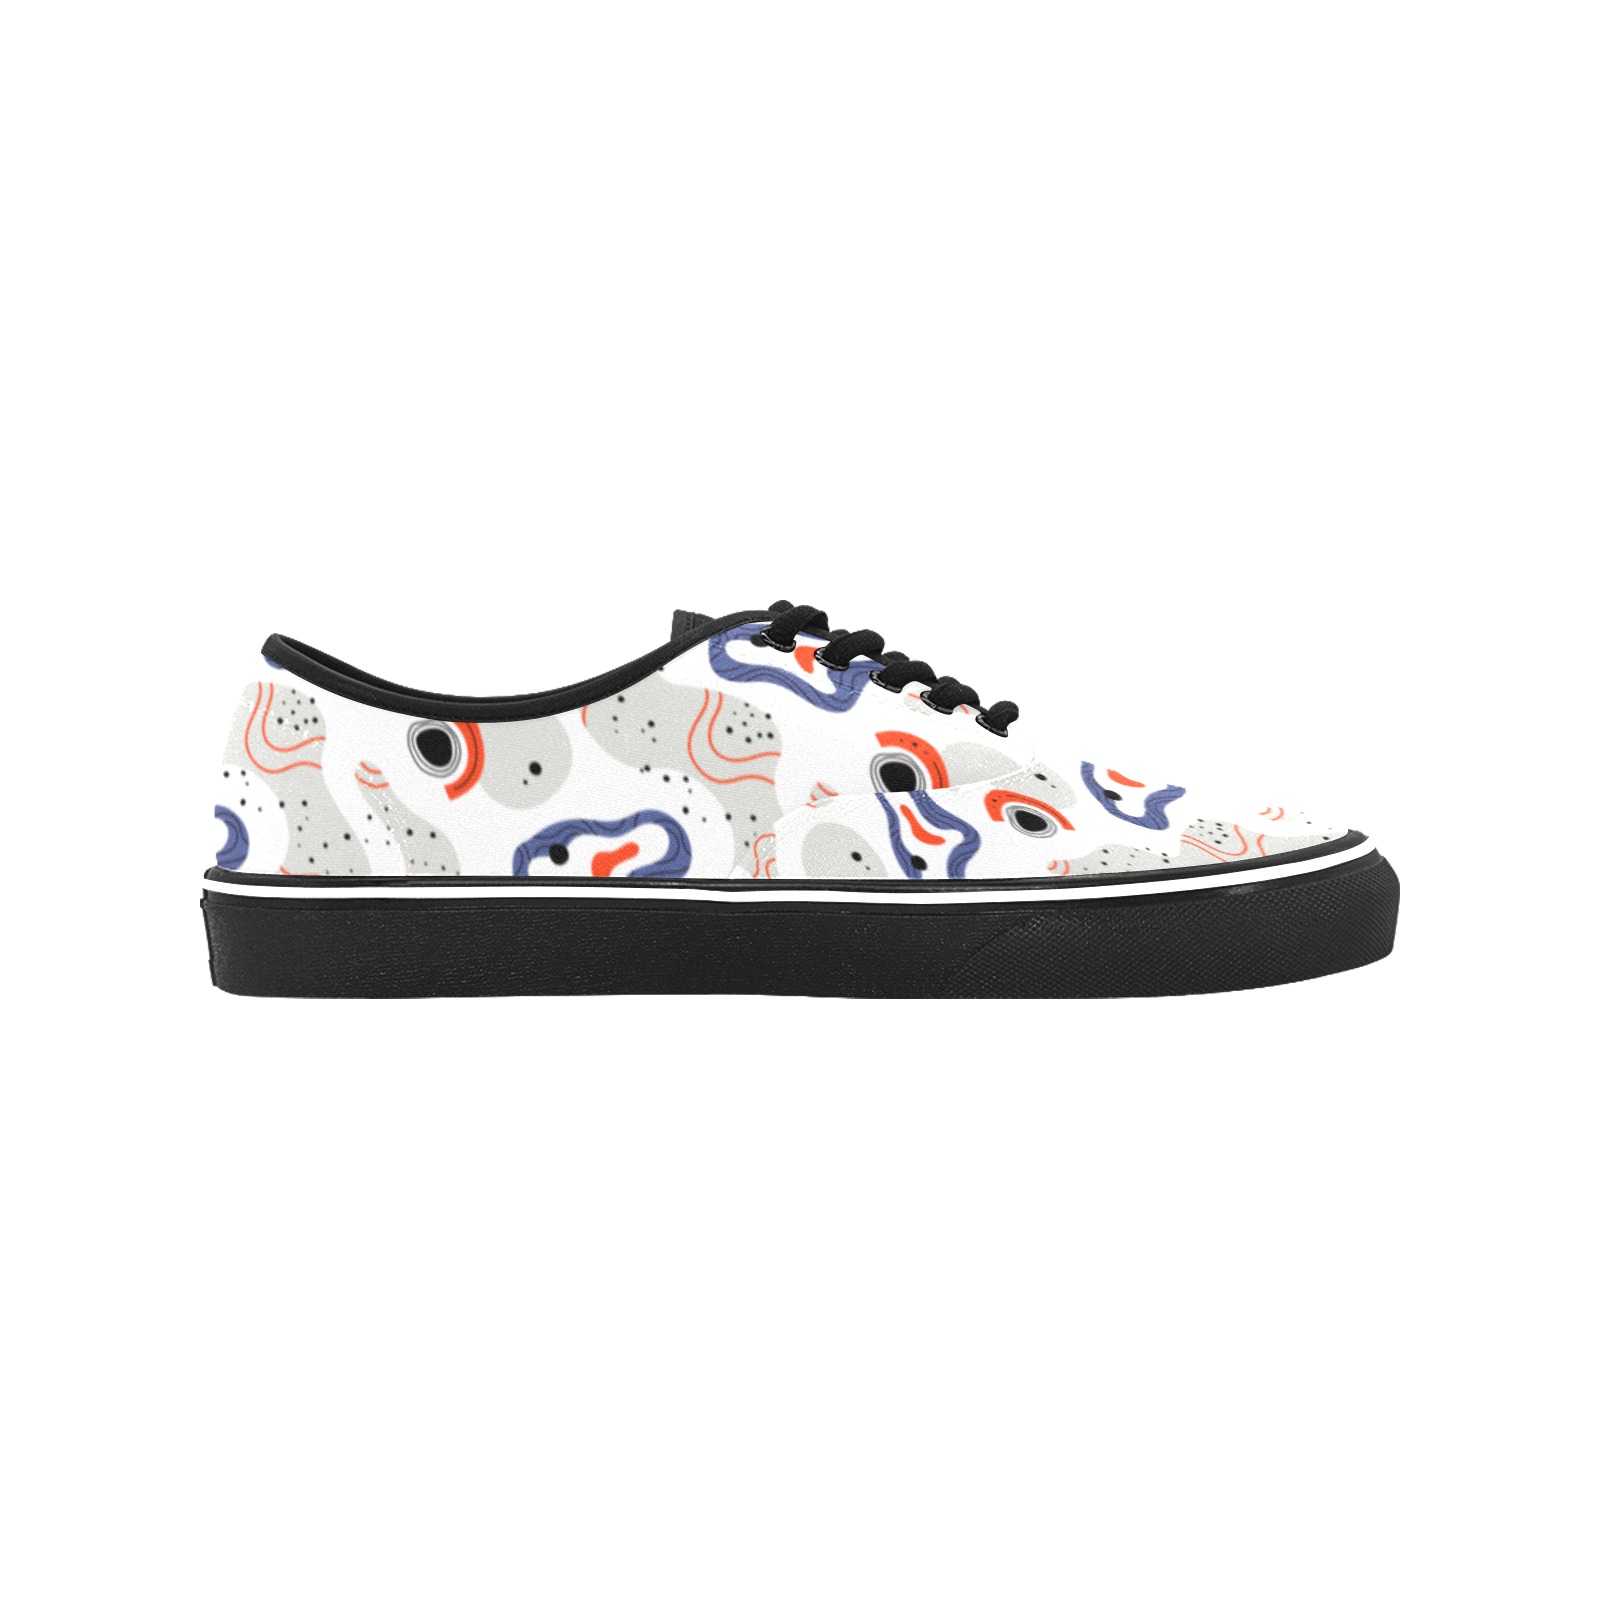 Elegant Abstract Mid Century Pattern Classic Women's Canvas Low Top Shoes (Model E001-4)